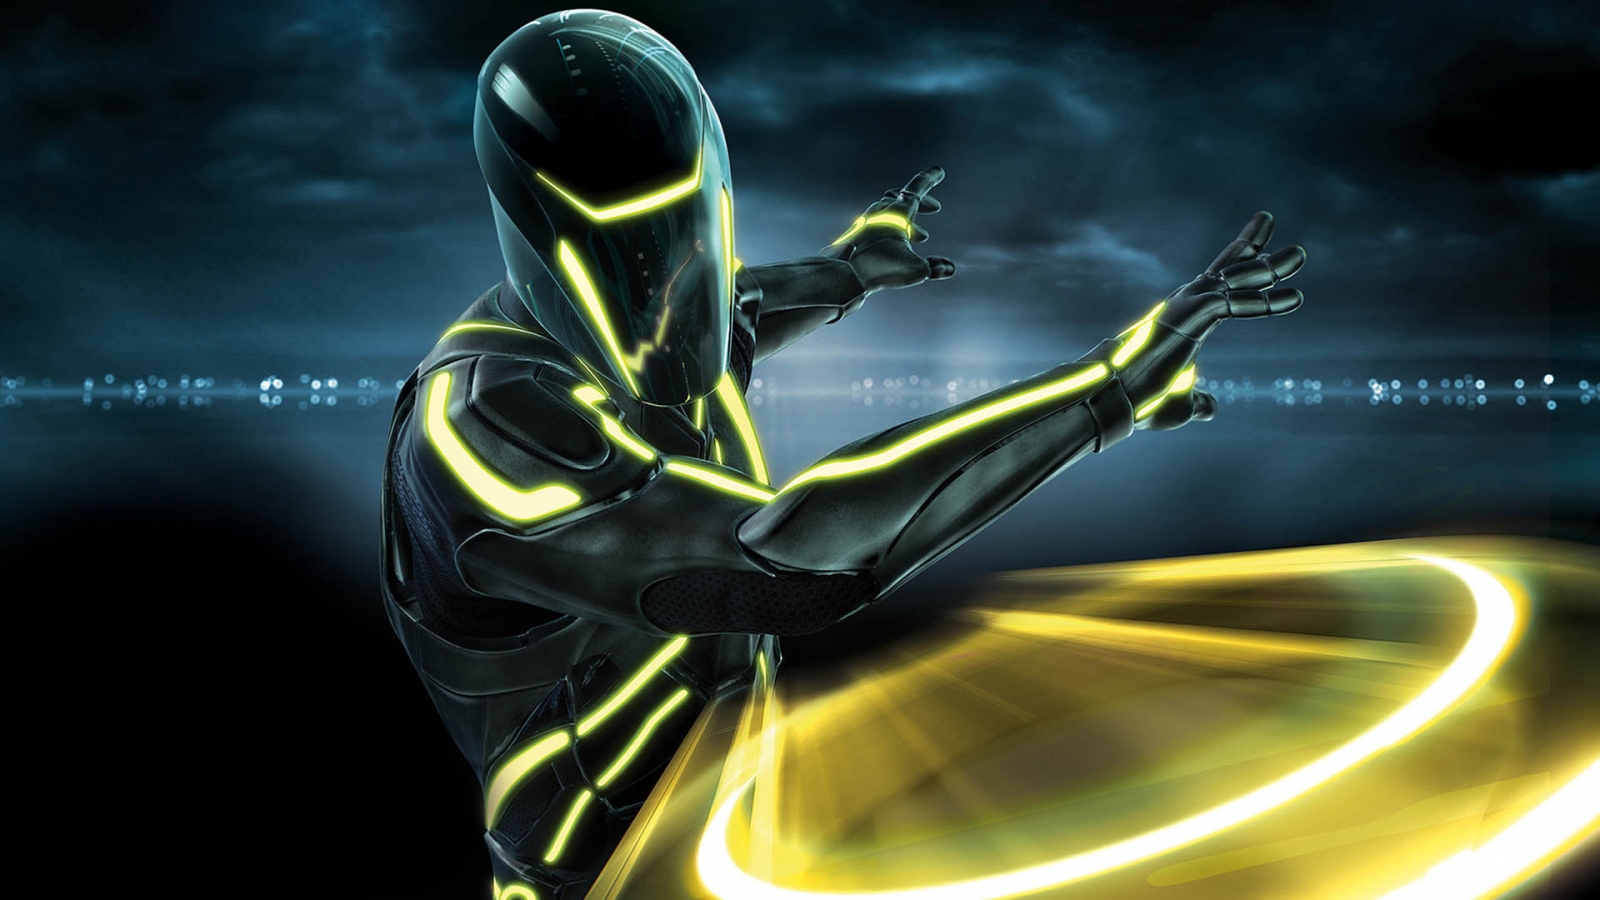 Tron Legacy Clu for 1600 x 900 HDTV resolution